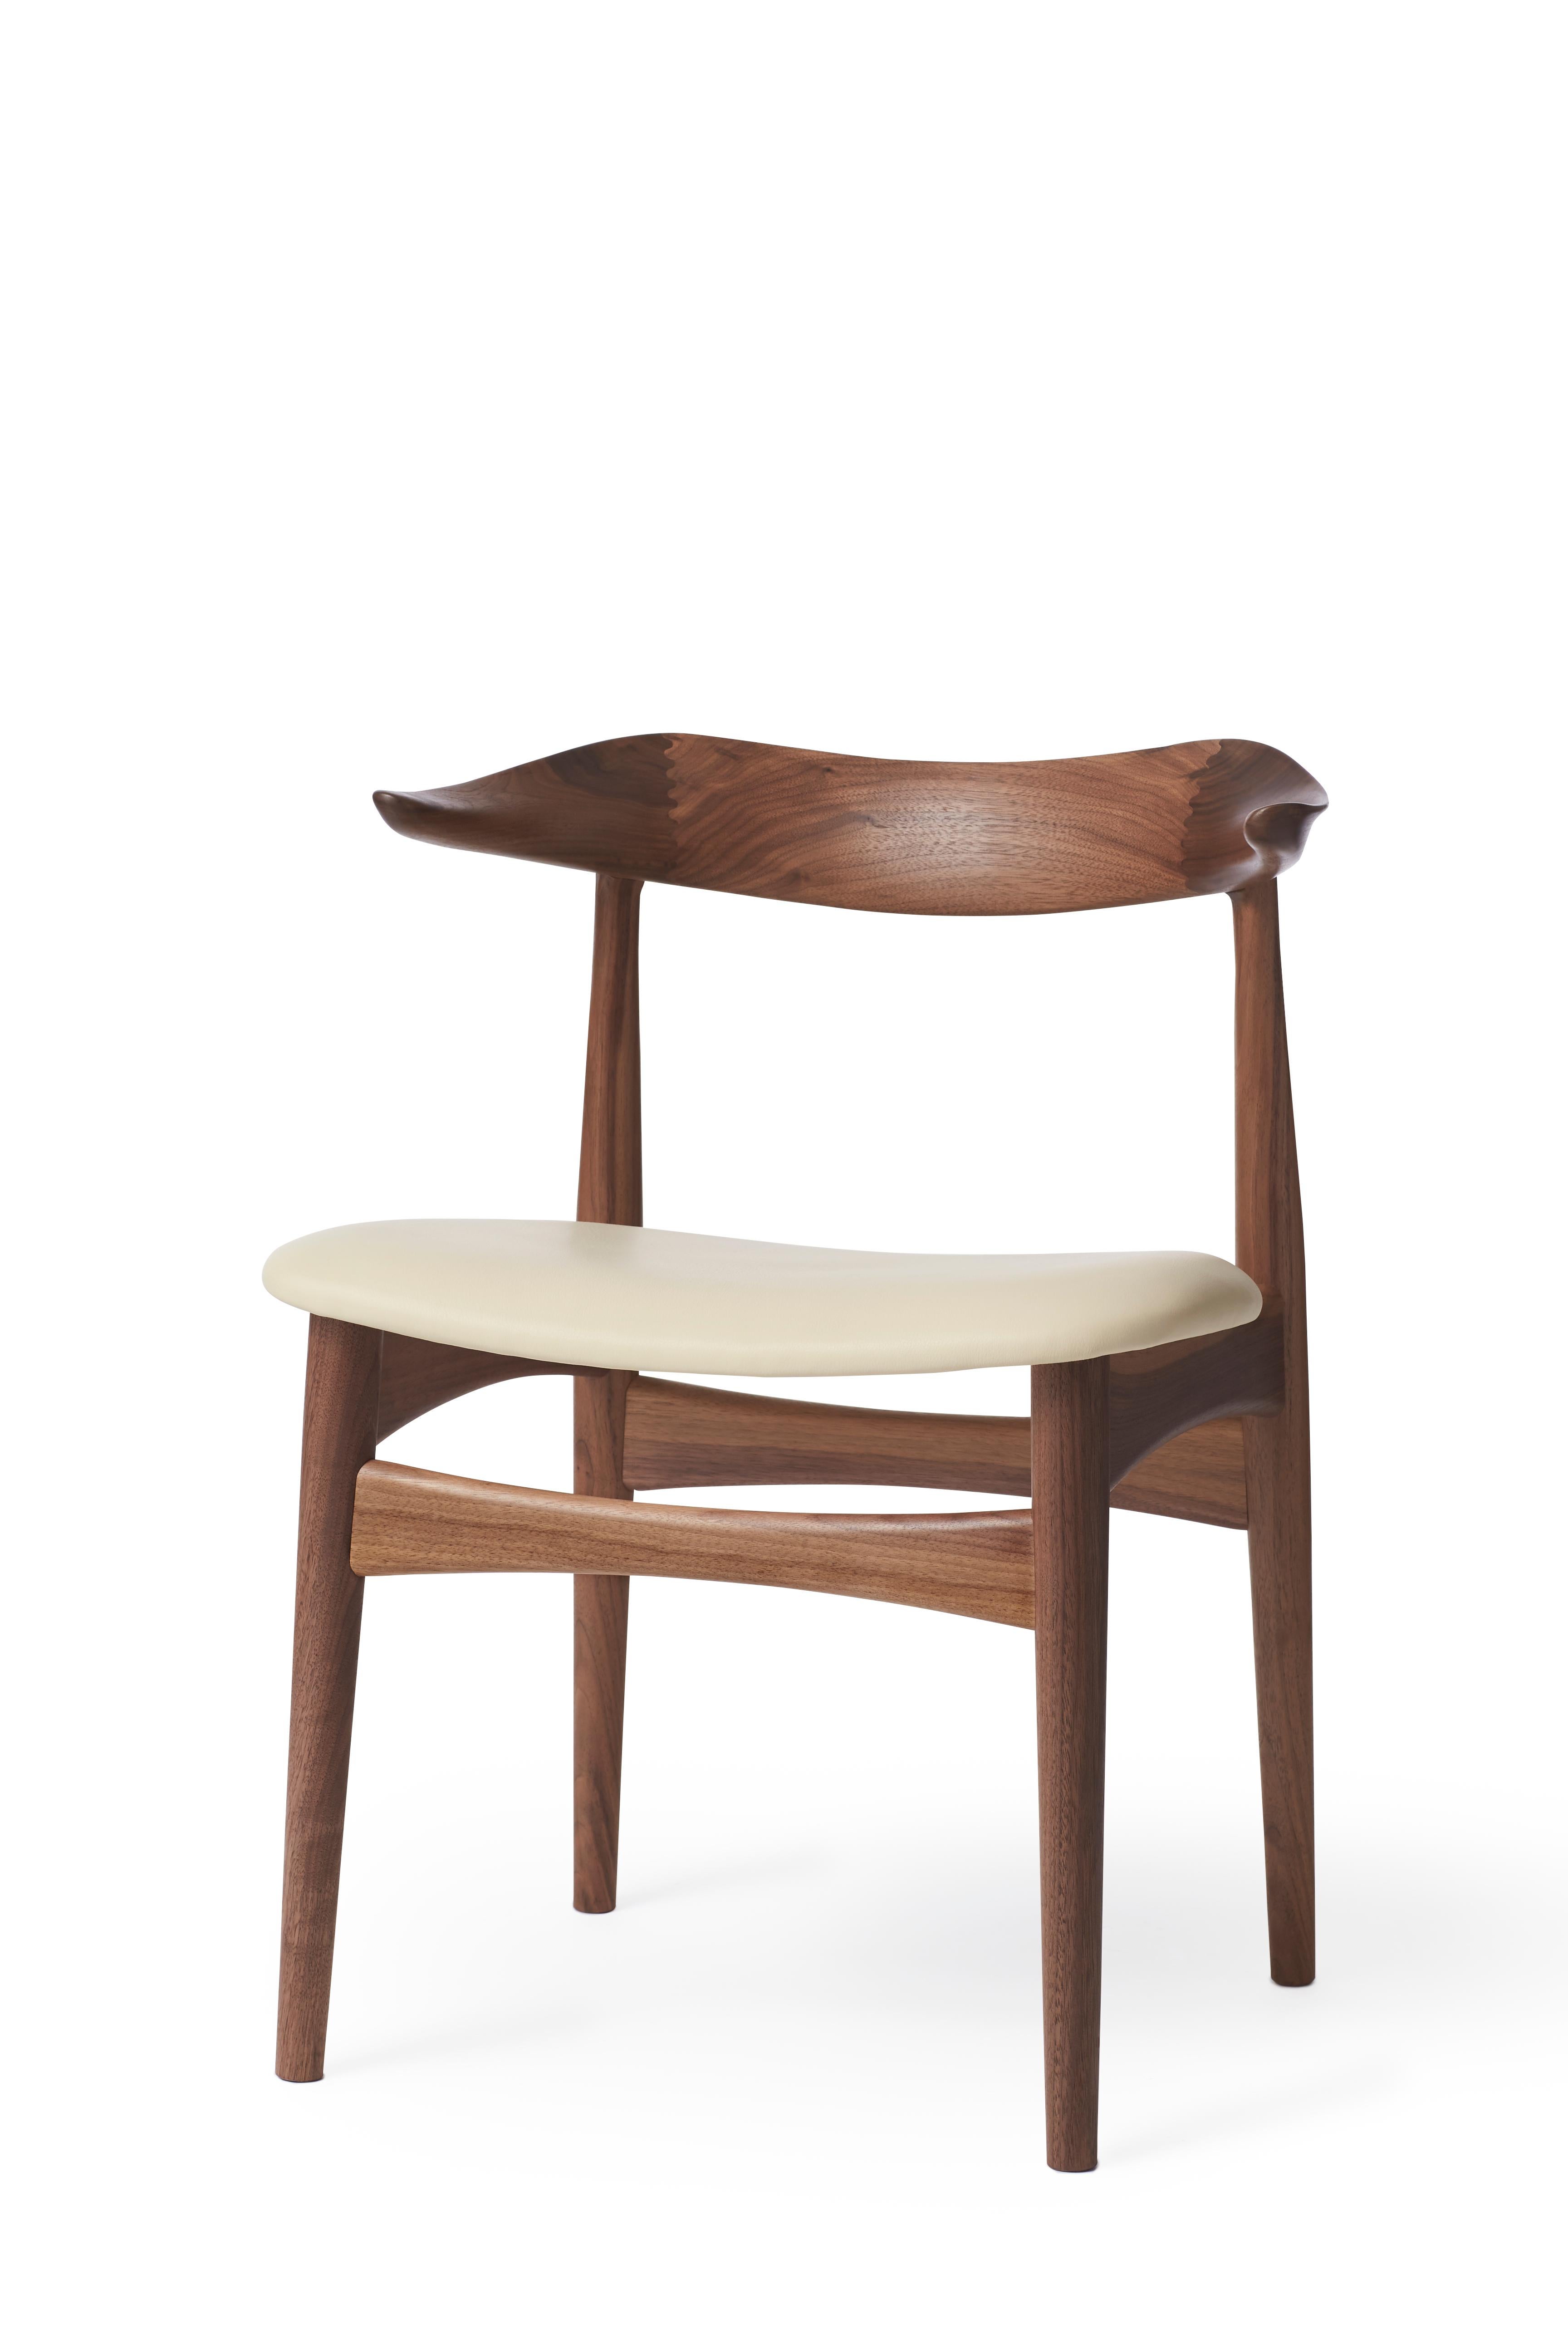 For Sale: White (Prescott 201) Cow Horn Walnut Chair, by Knud Færch from Warm Nordic 2